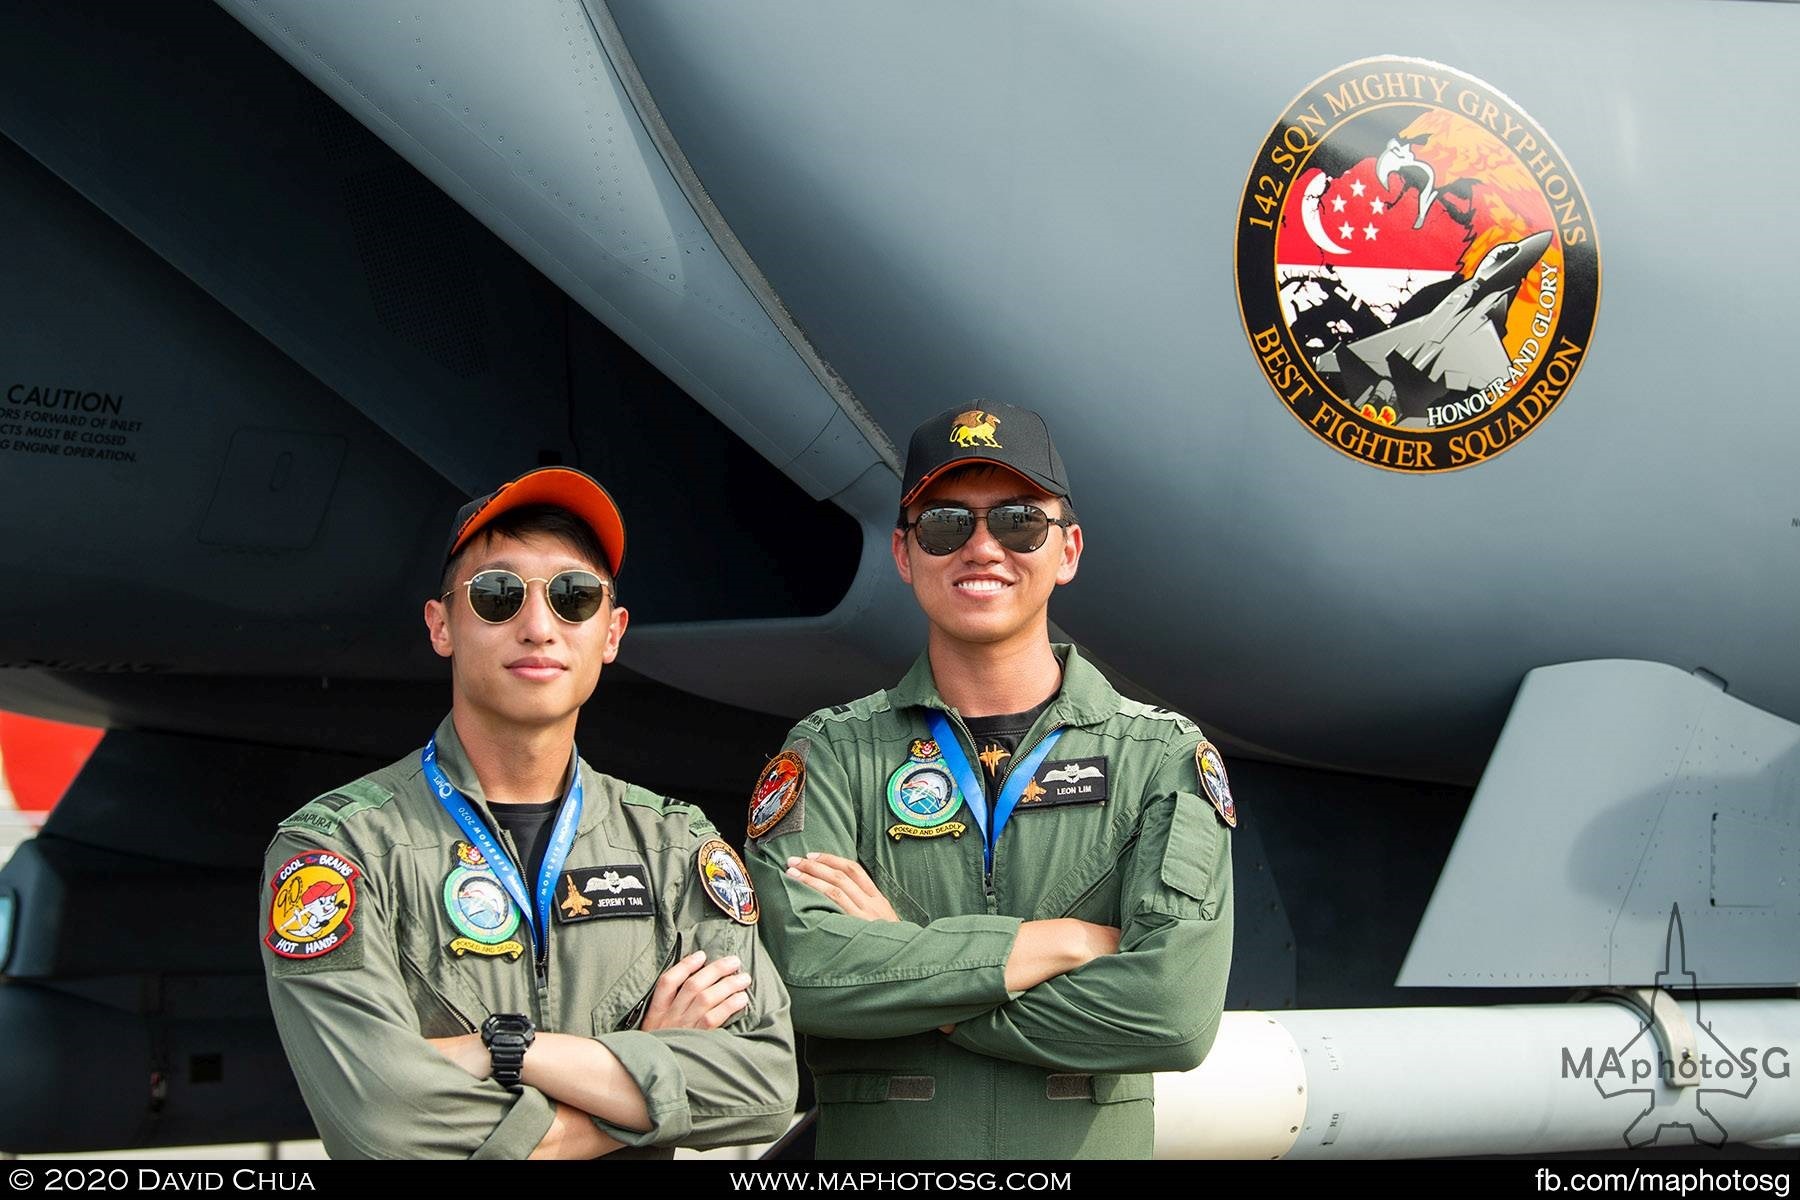 Aircrew of the RSAF 142 Squadron with their F-15SG fighter aircraft showing off the best fighter squadron badge